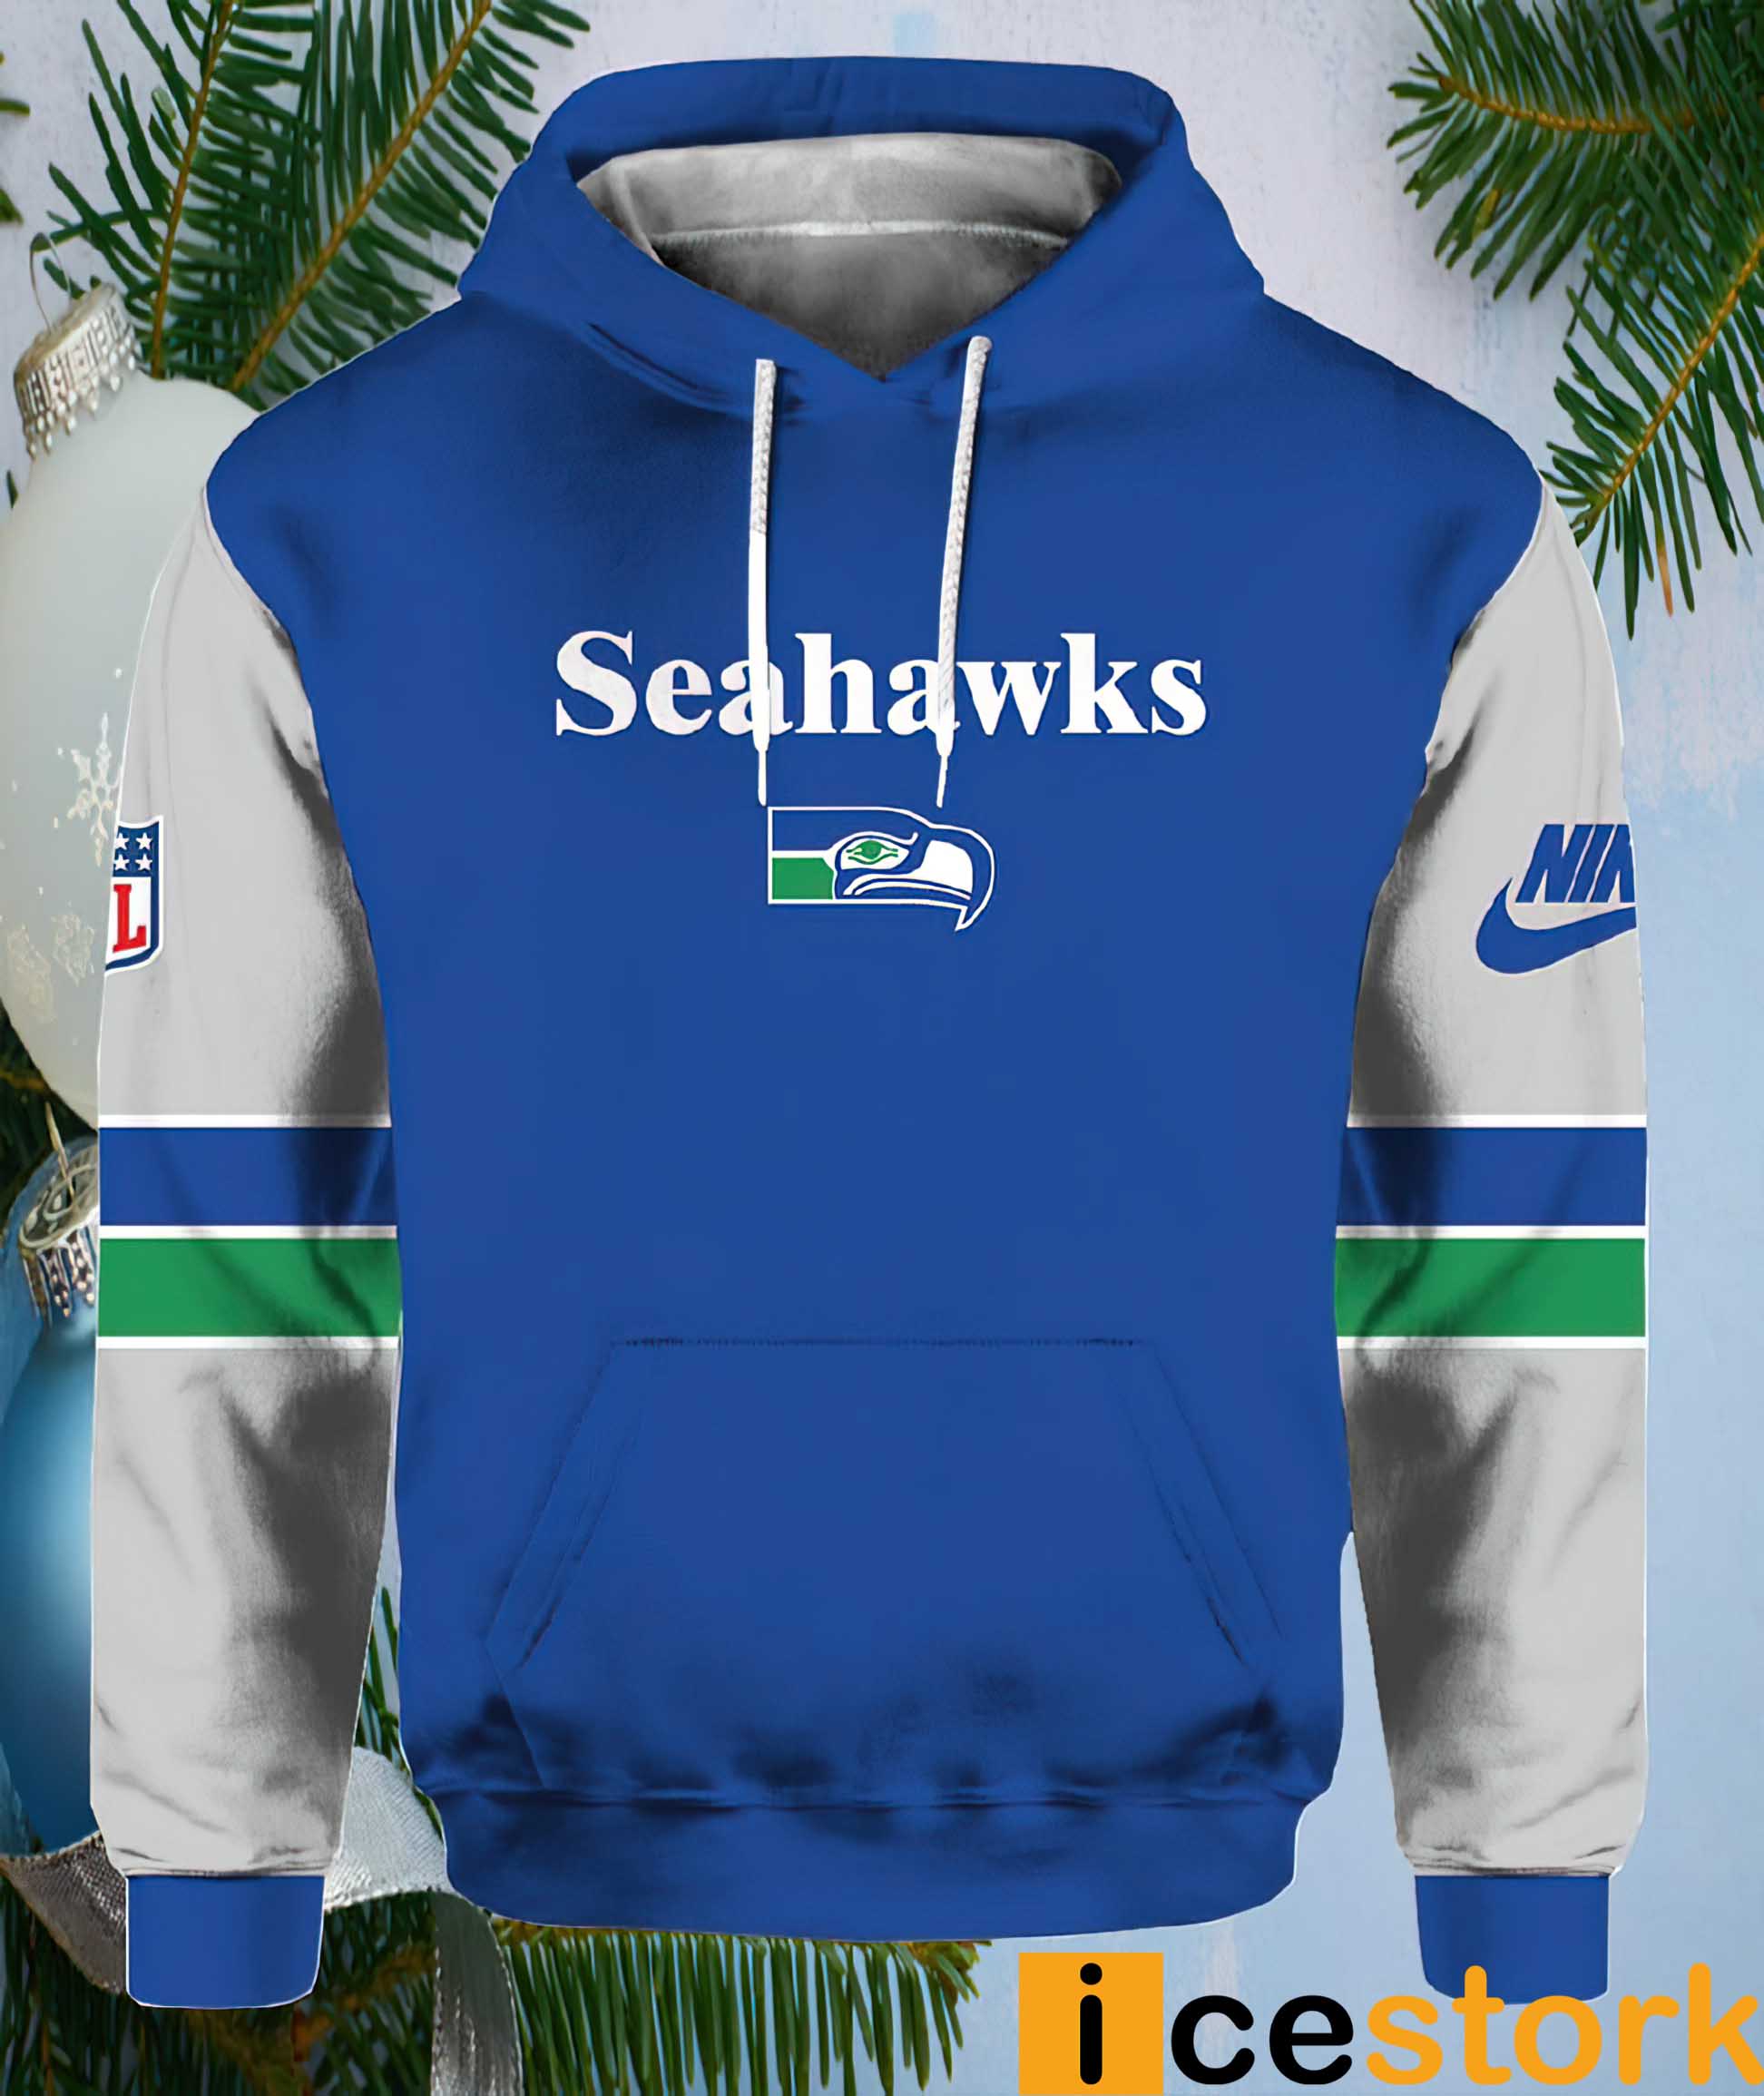 Seattle Seahawks Coach Pete Carroll Salute To Service 3D Pullover Hoodie, by Minhkhuongpham